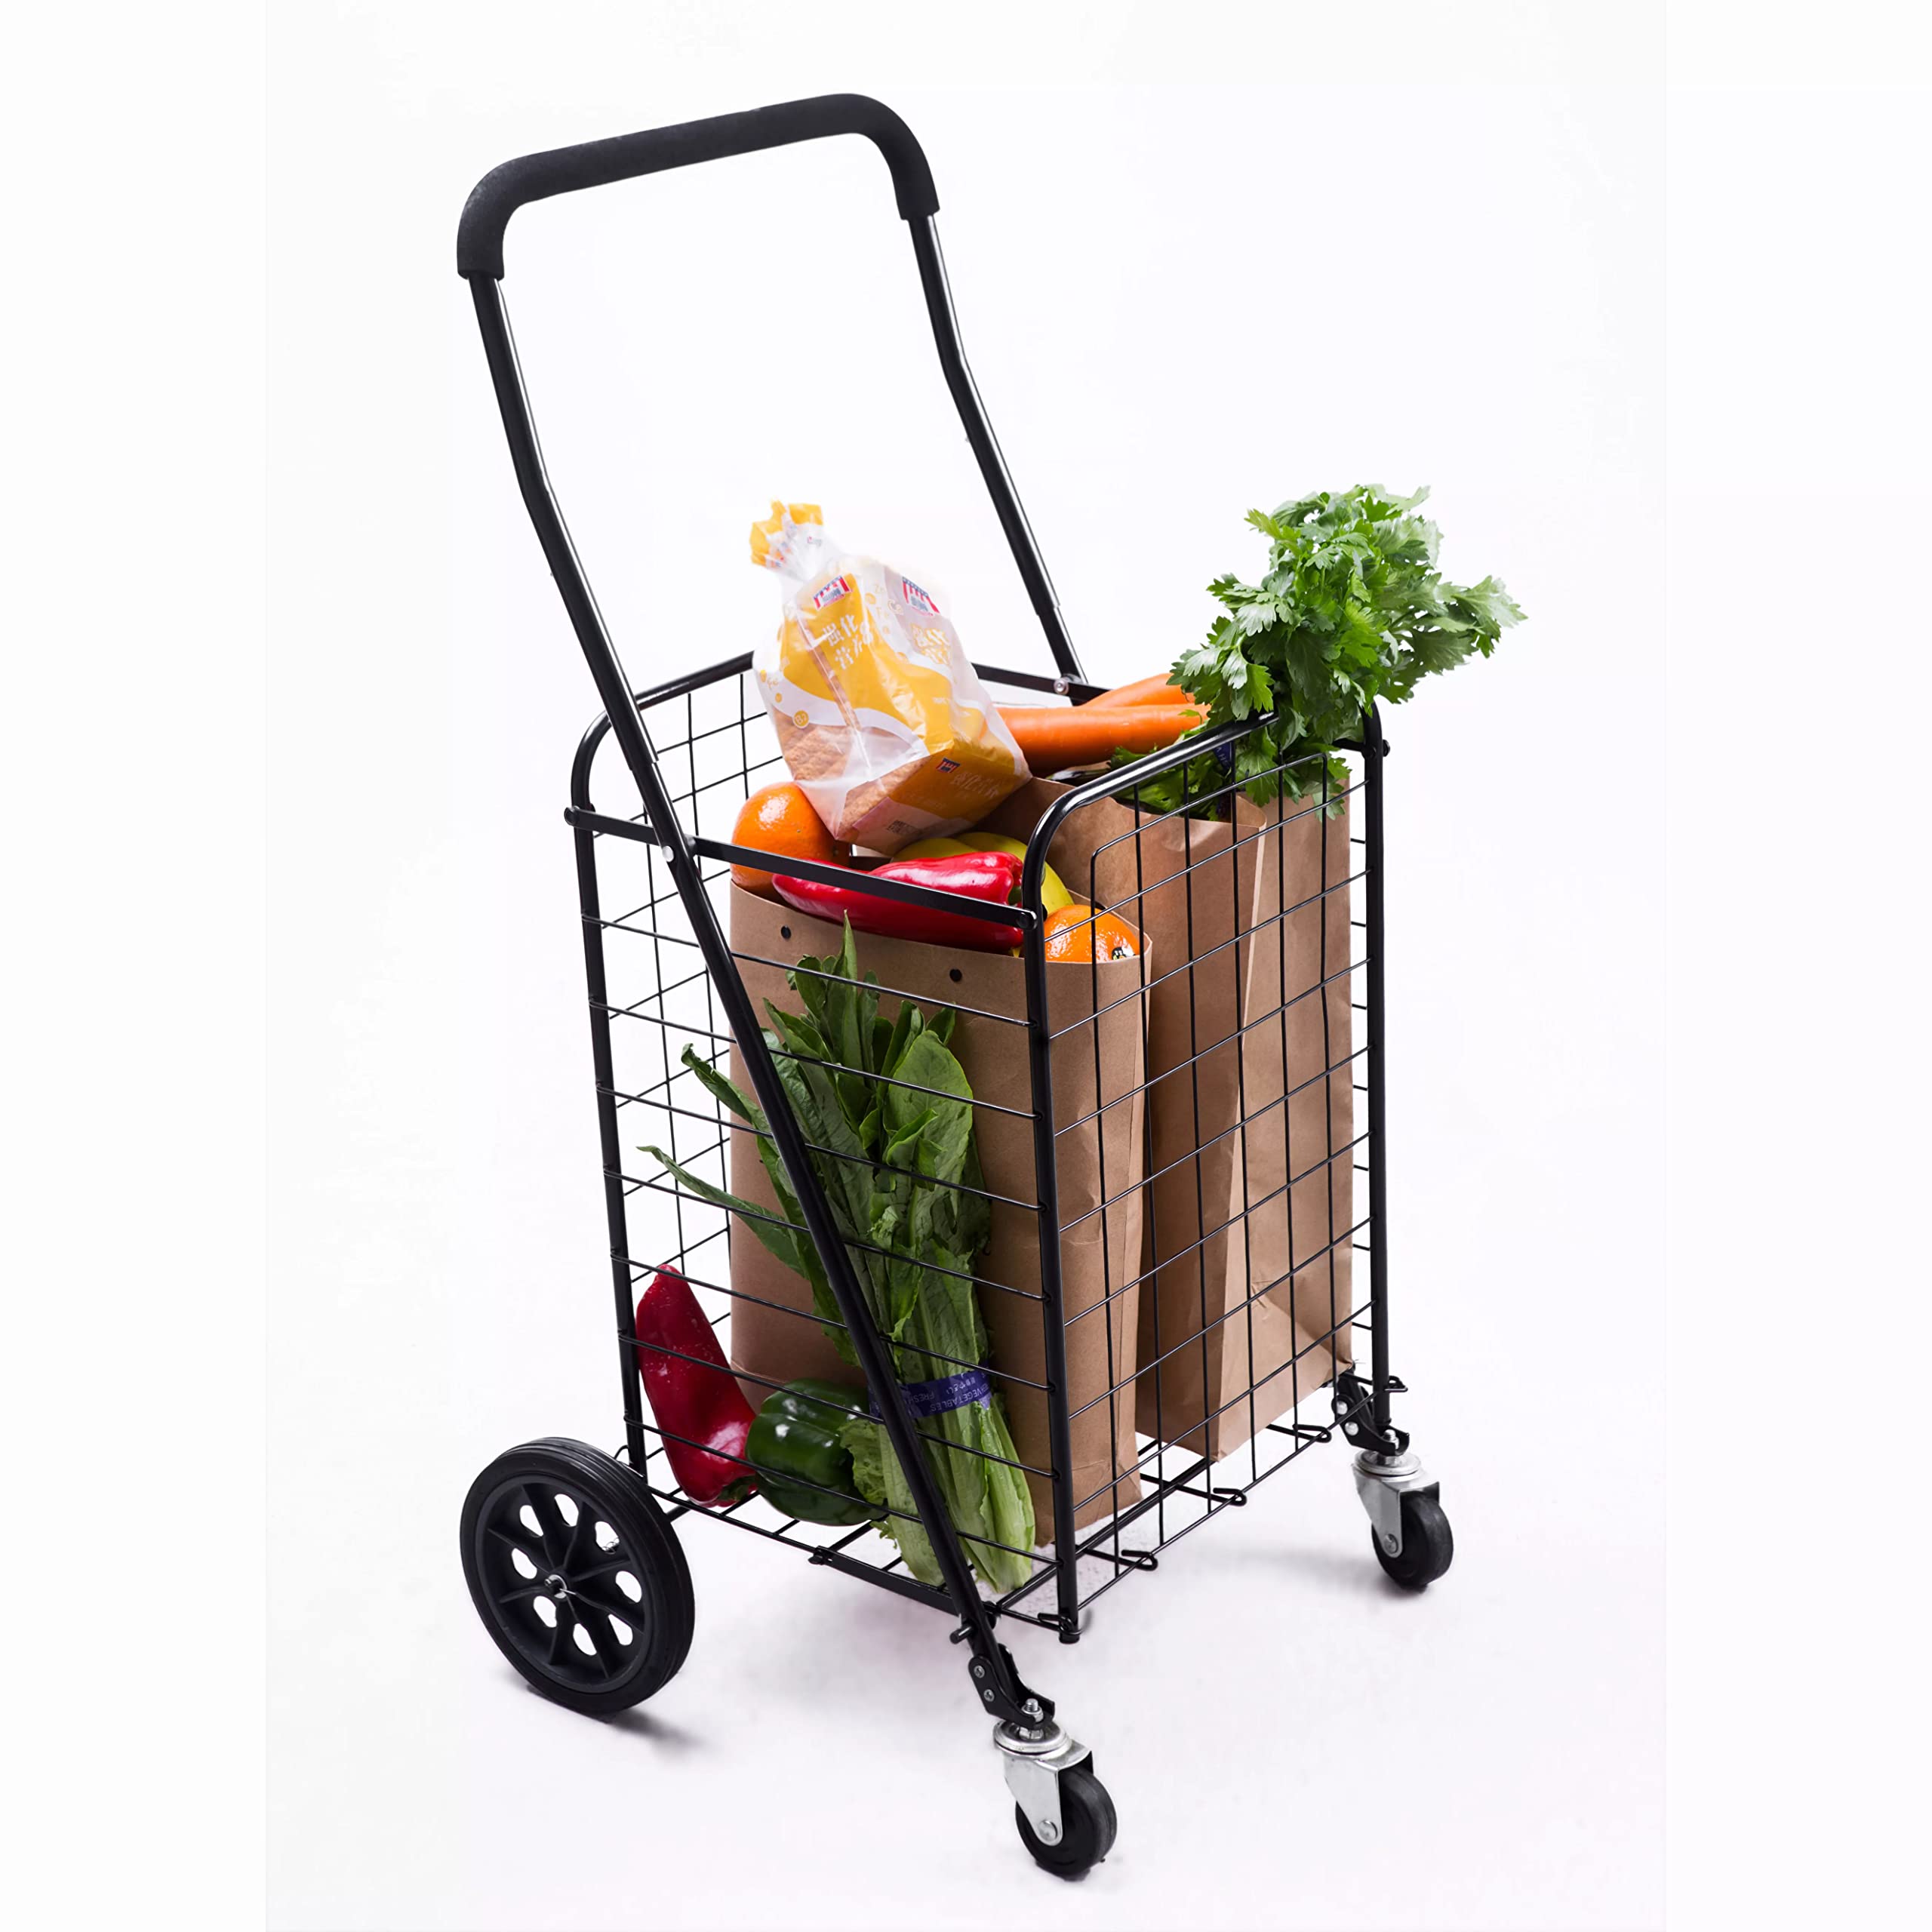 Mount Plus SF-118 Grocery Utility Shopping Cart with Dual Swivel Wheels | Easily Collapsible and Portable to Save Space and Heavy Duty | Rolls Smoothly on Streets, Store, Sidewalks and Indoors